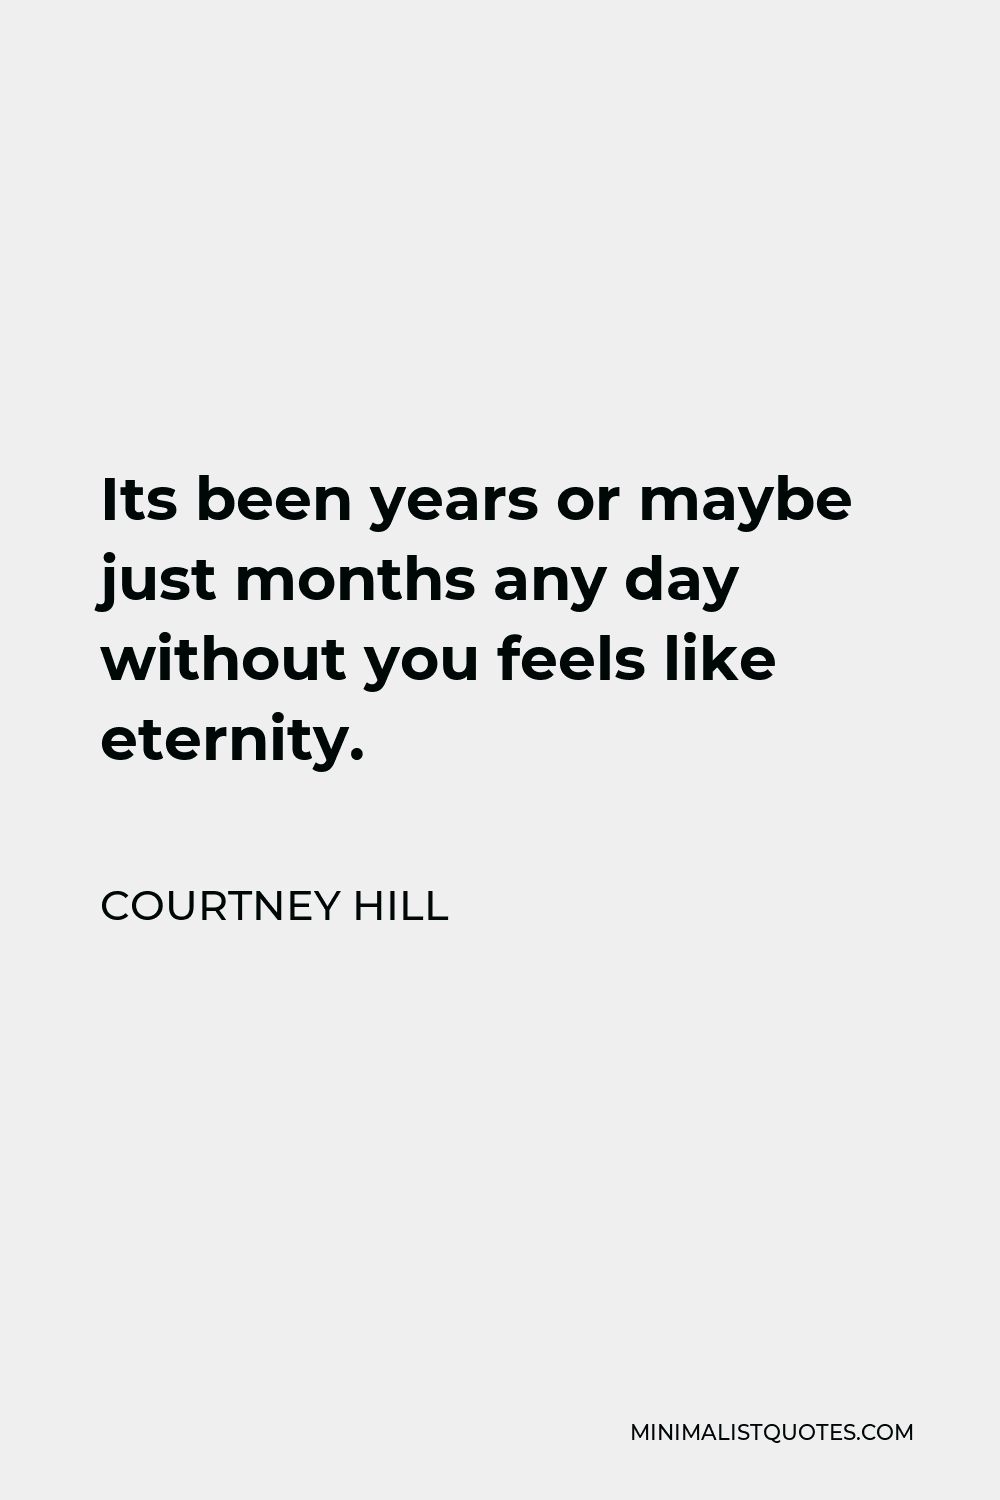 Courtney Hill Quote - Its been years or maybe just months any day without you feels like eternity.